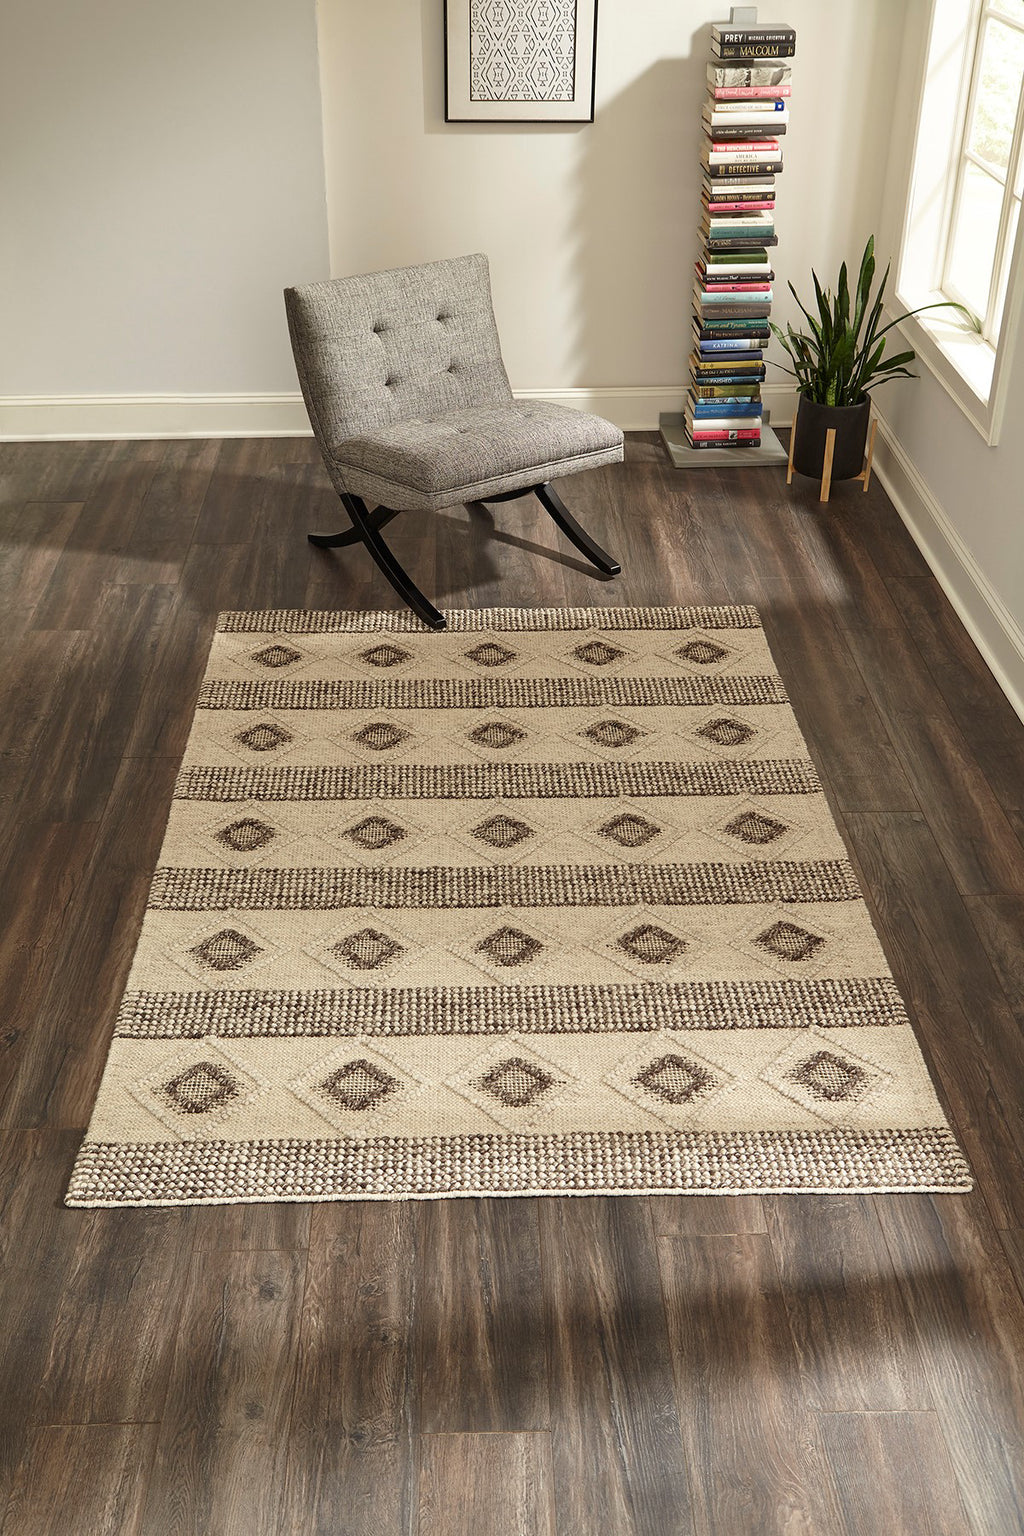 Momeni Andes AND-6 Beige Area Rug Room Image Feature